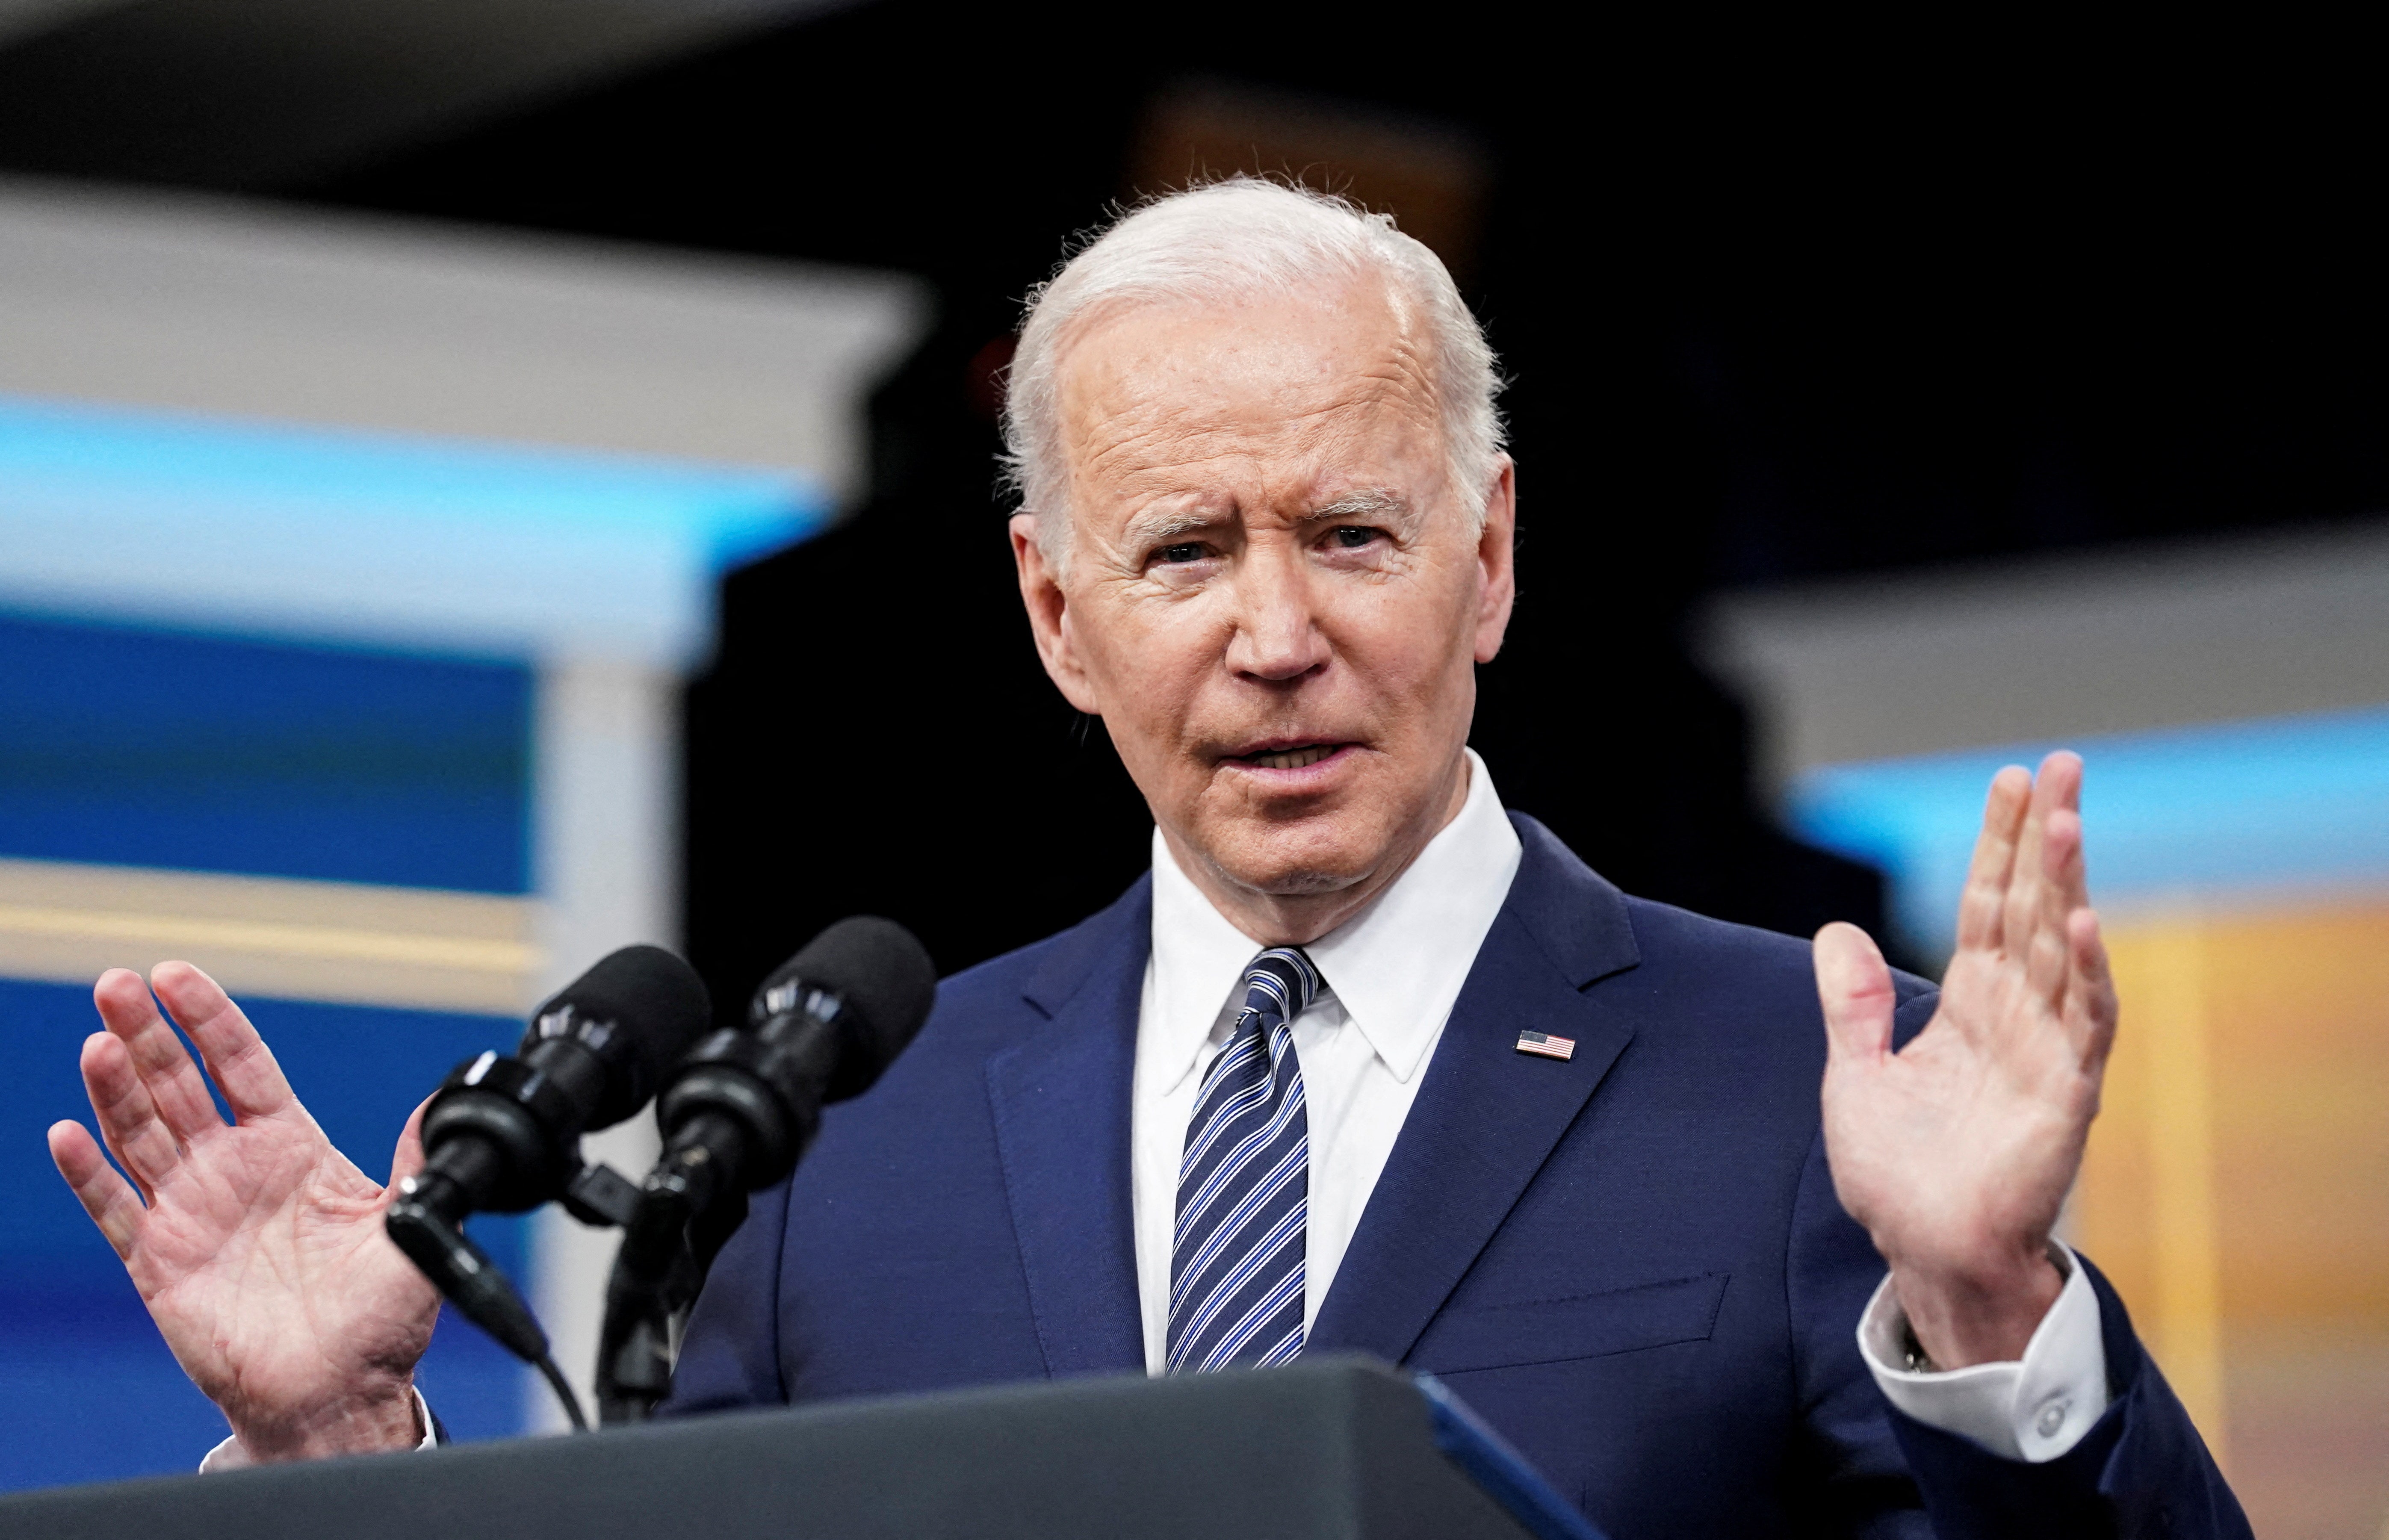 Biden repeats false claim about trips to Iraq and Afghanistan, this time to graduating midshipmen